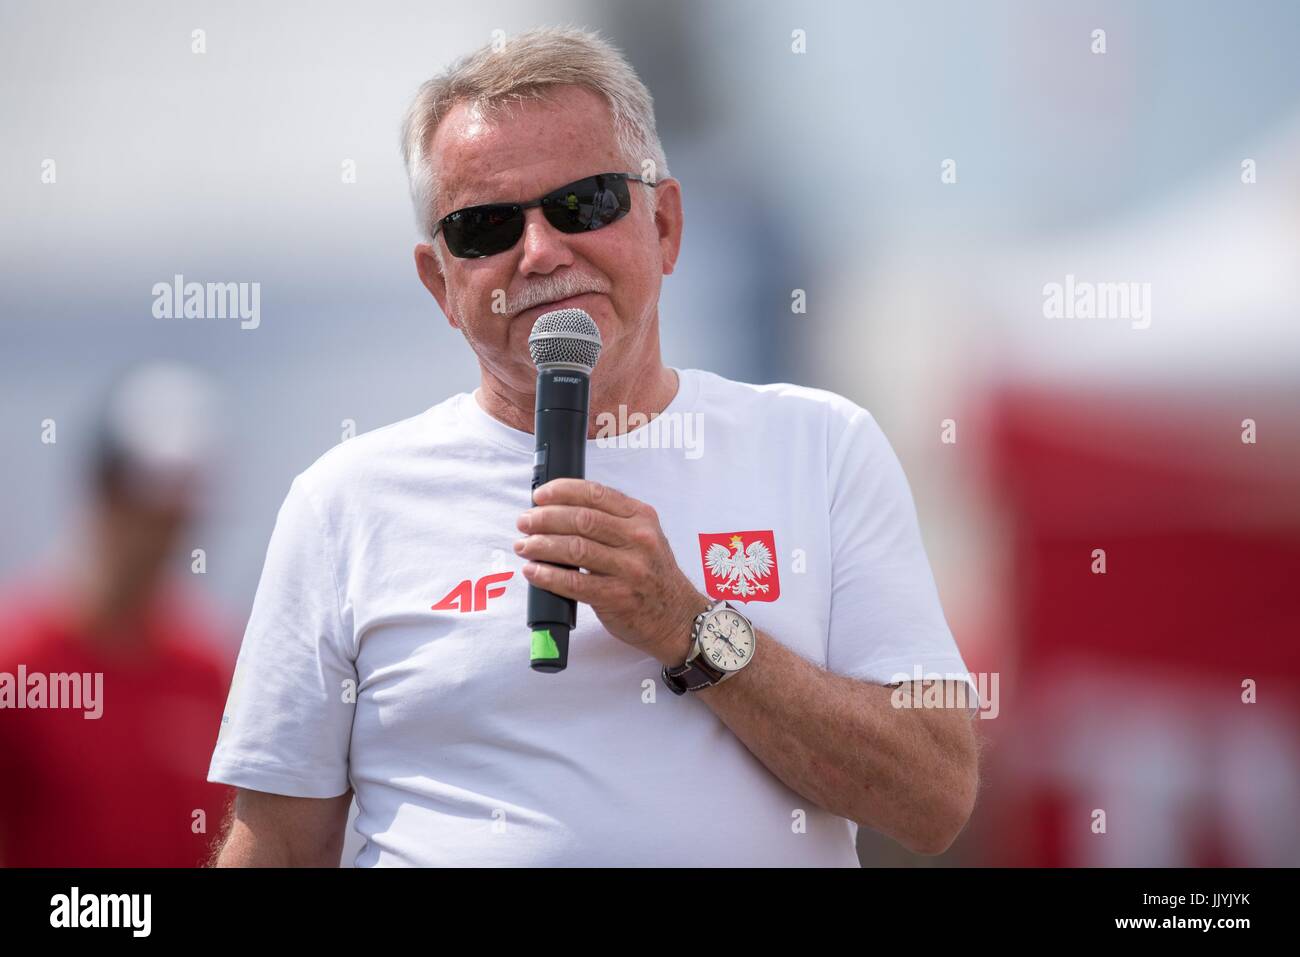 Wroclaw, Poland. 21st July, 2017. The World Games, an international multi-sport event is hold on July 20 in Wroclaw, Poland In the picture: Jerzy Mikula Credit: East News sp. z o.o./Alamy Live News Stock Photo